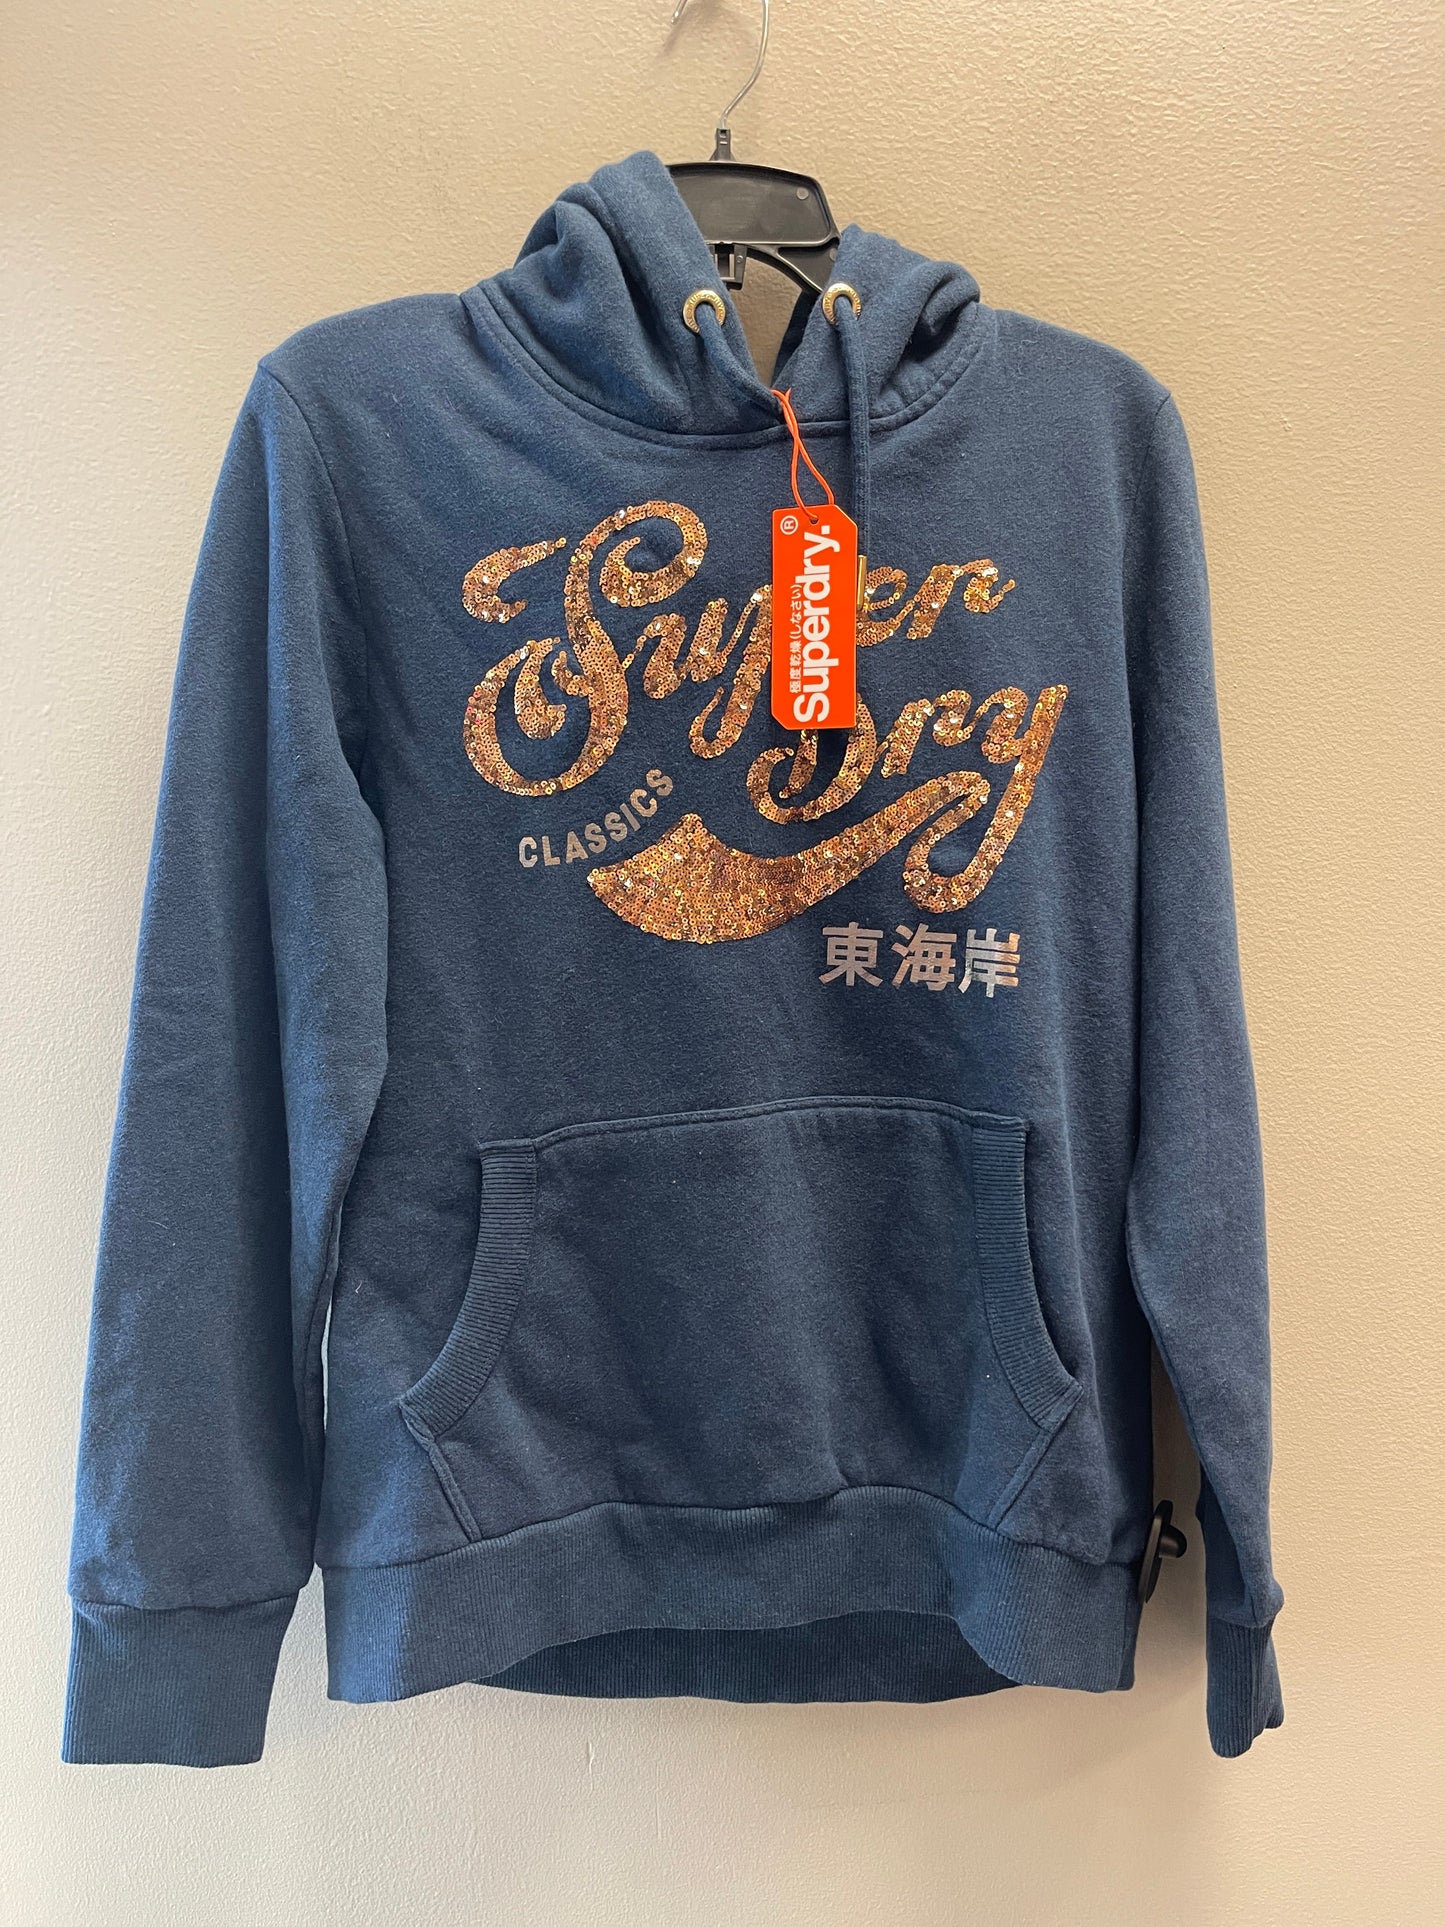 Sweatshirt Hoodie By Clothes Mentor  Size: L